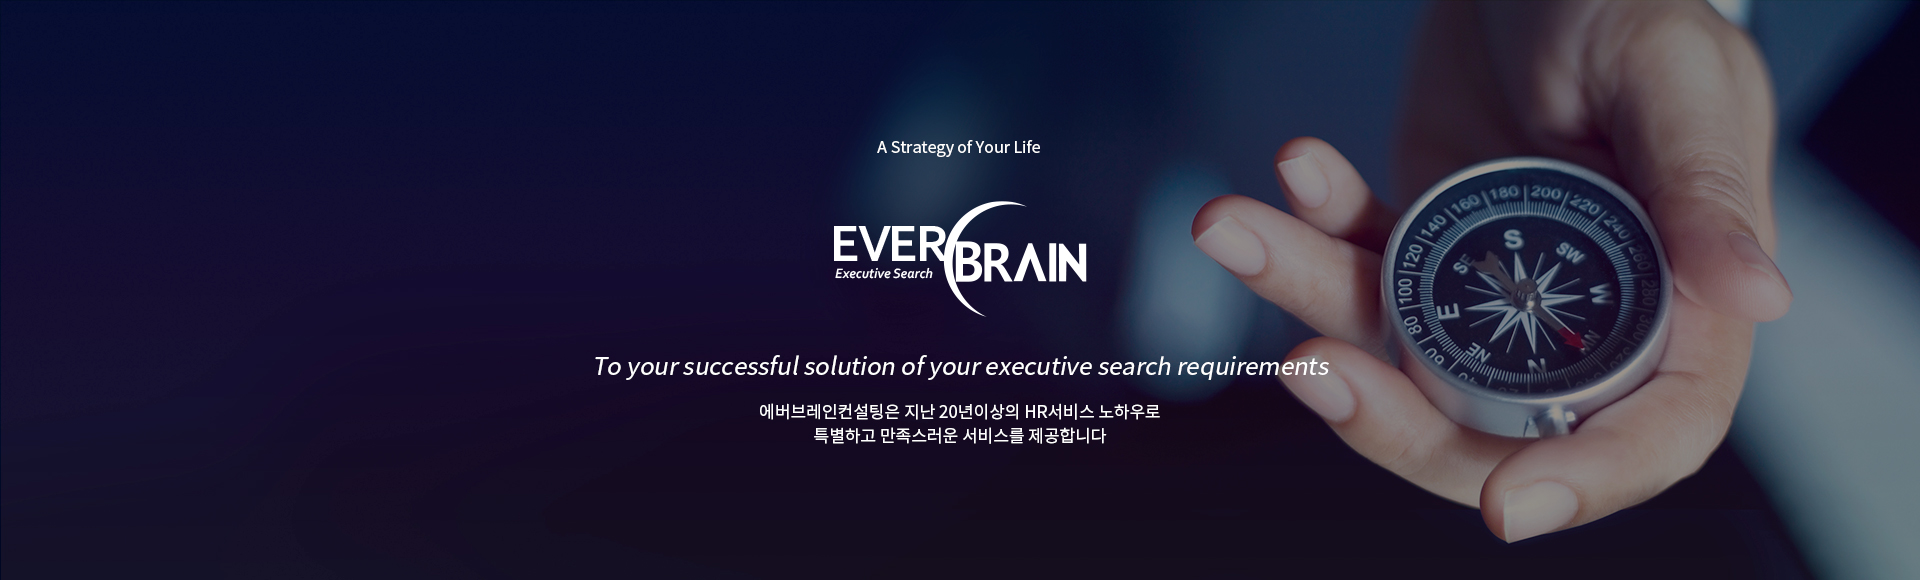 A Strategy of Your Life, EVERBRAIN. 극  20 HR Ͽ Ưϰ  񽺸 մϴ. To the successful solution of your executive search requirements in Korea.